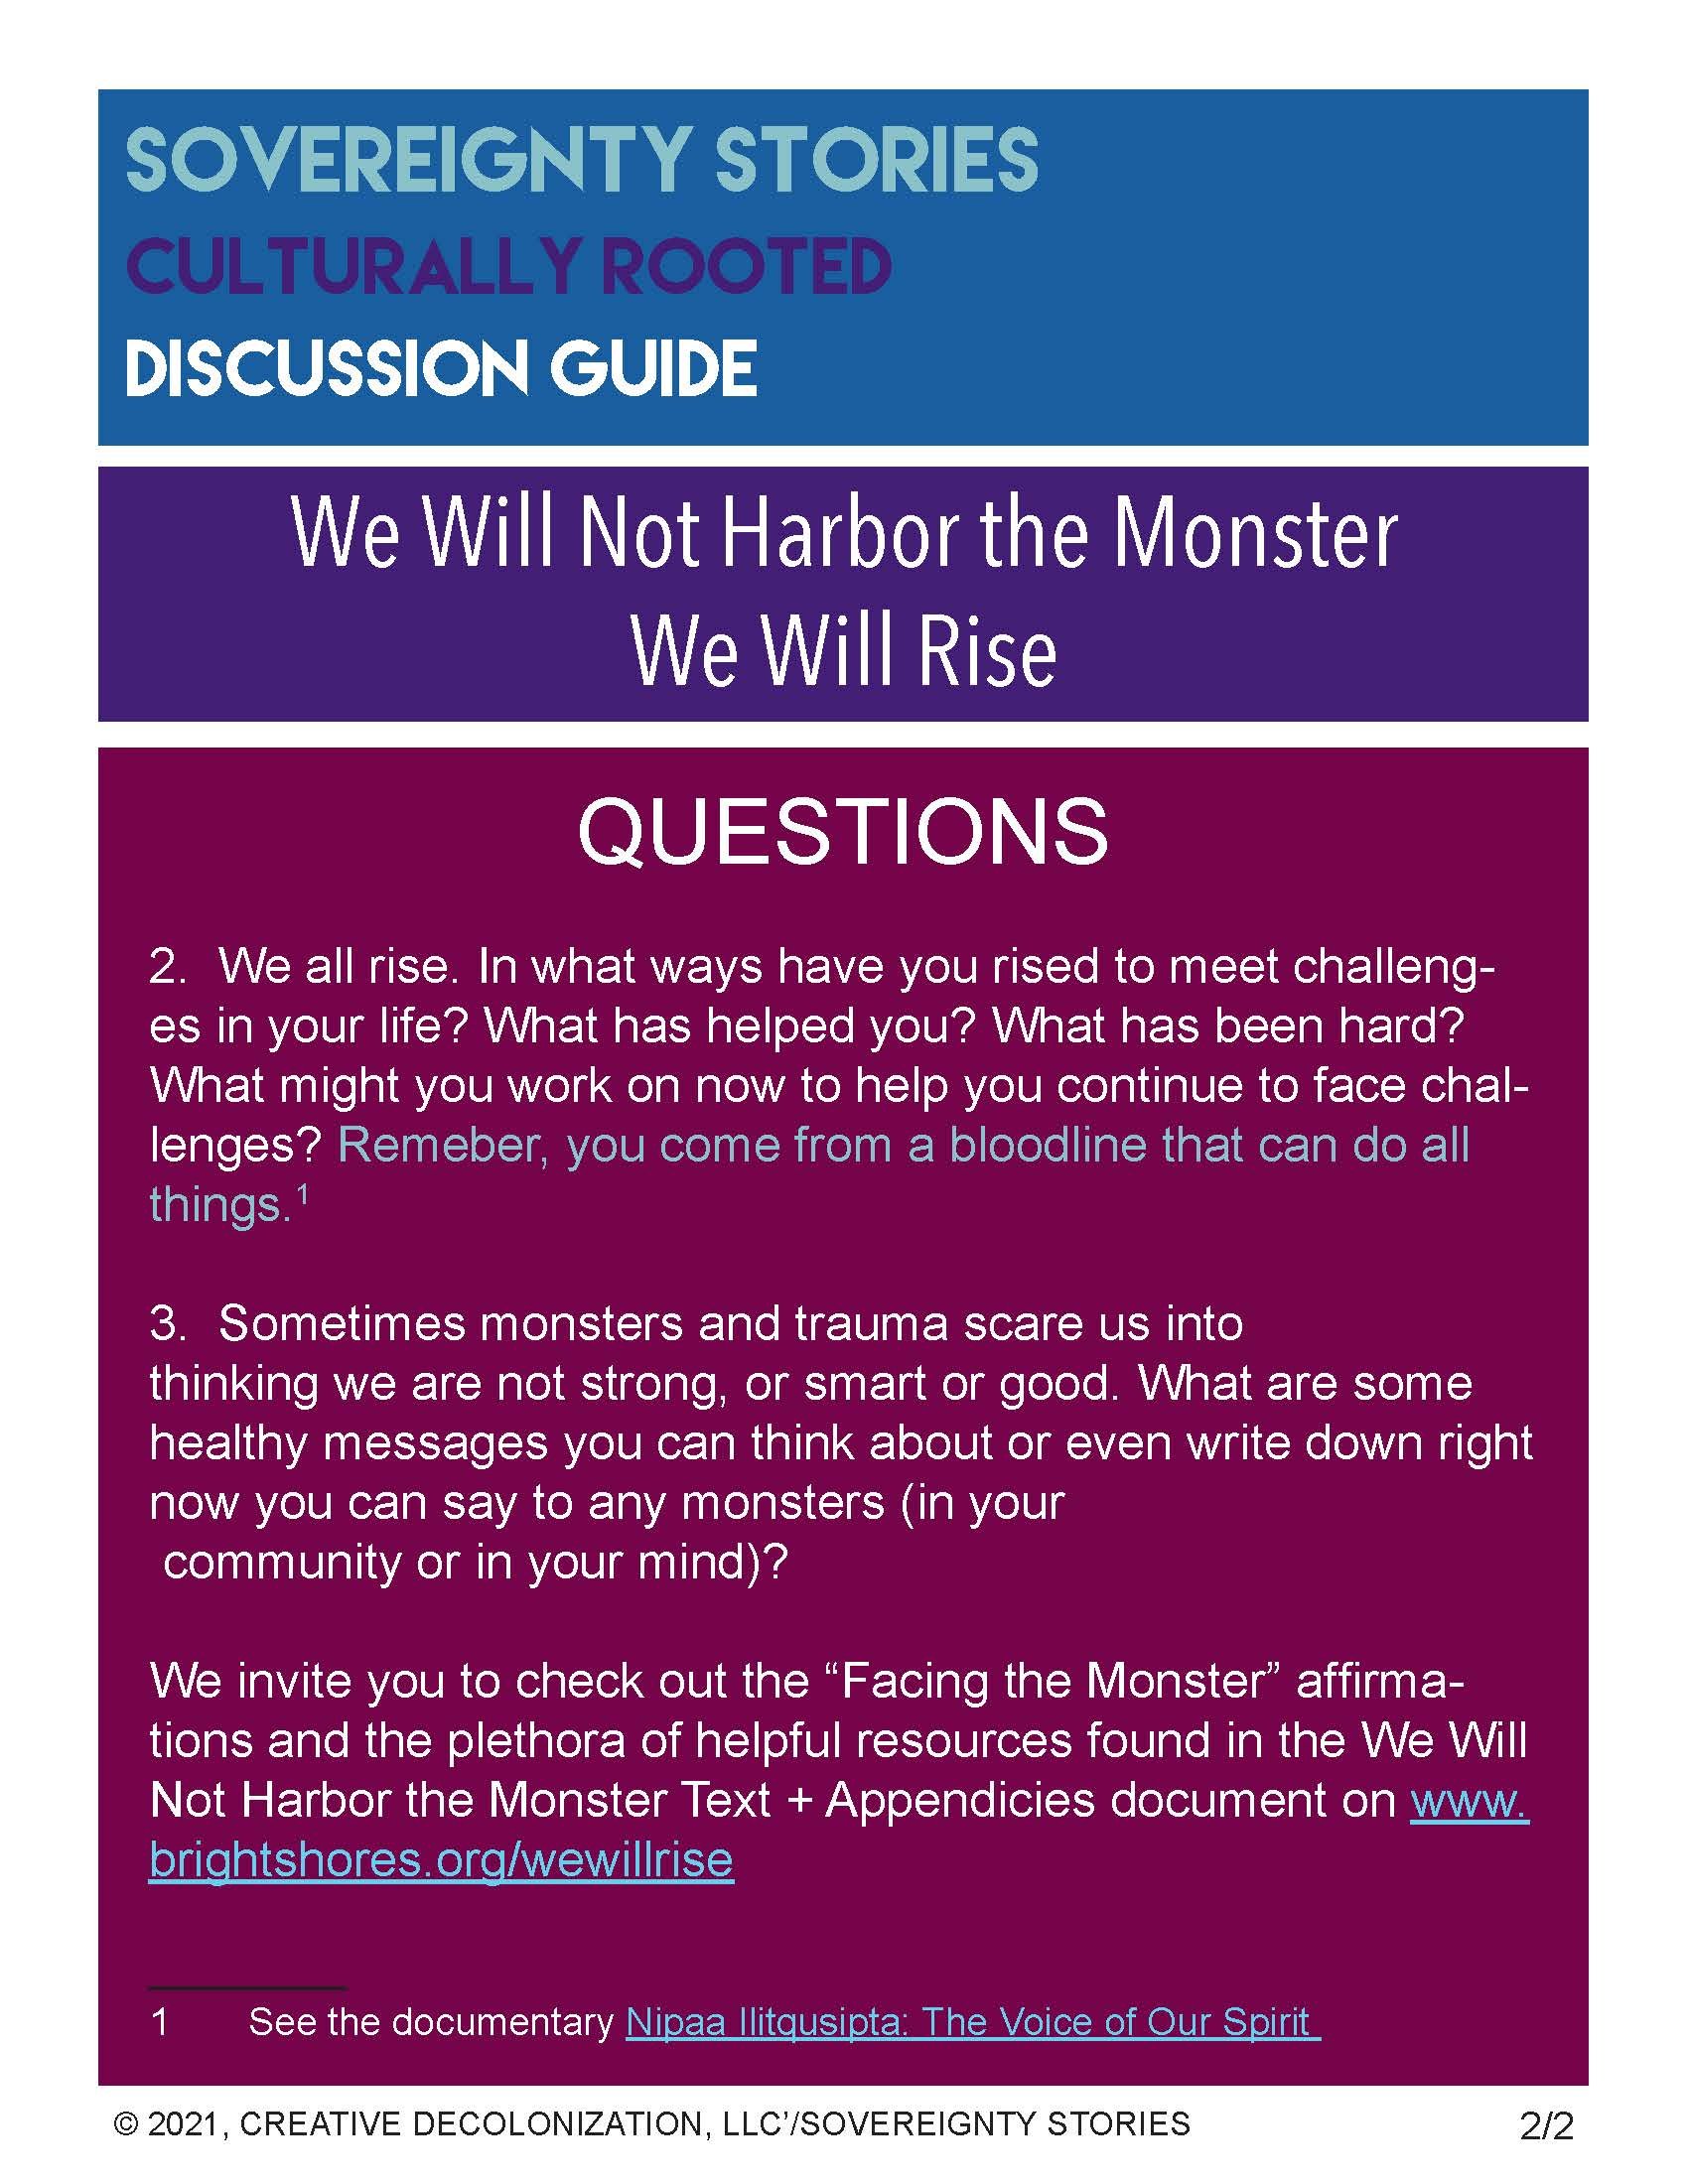 We%20Will%20Not%20Harbor%20the%20Monster_Discussion%20Guide_final_Page_2.jpg